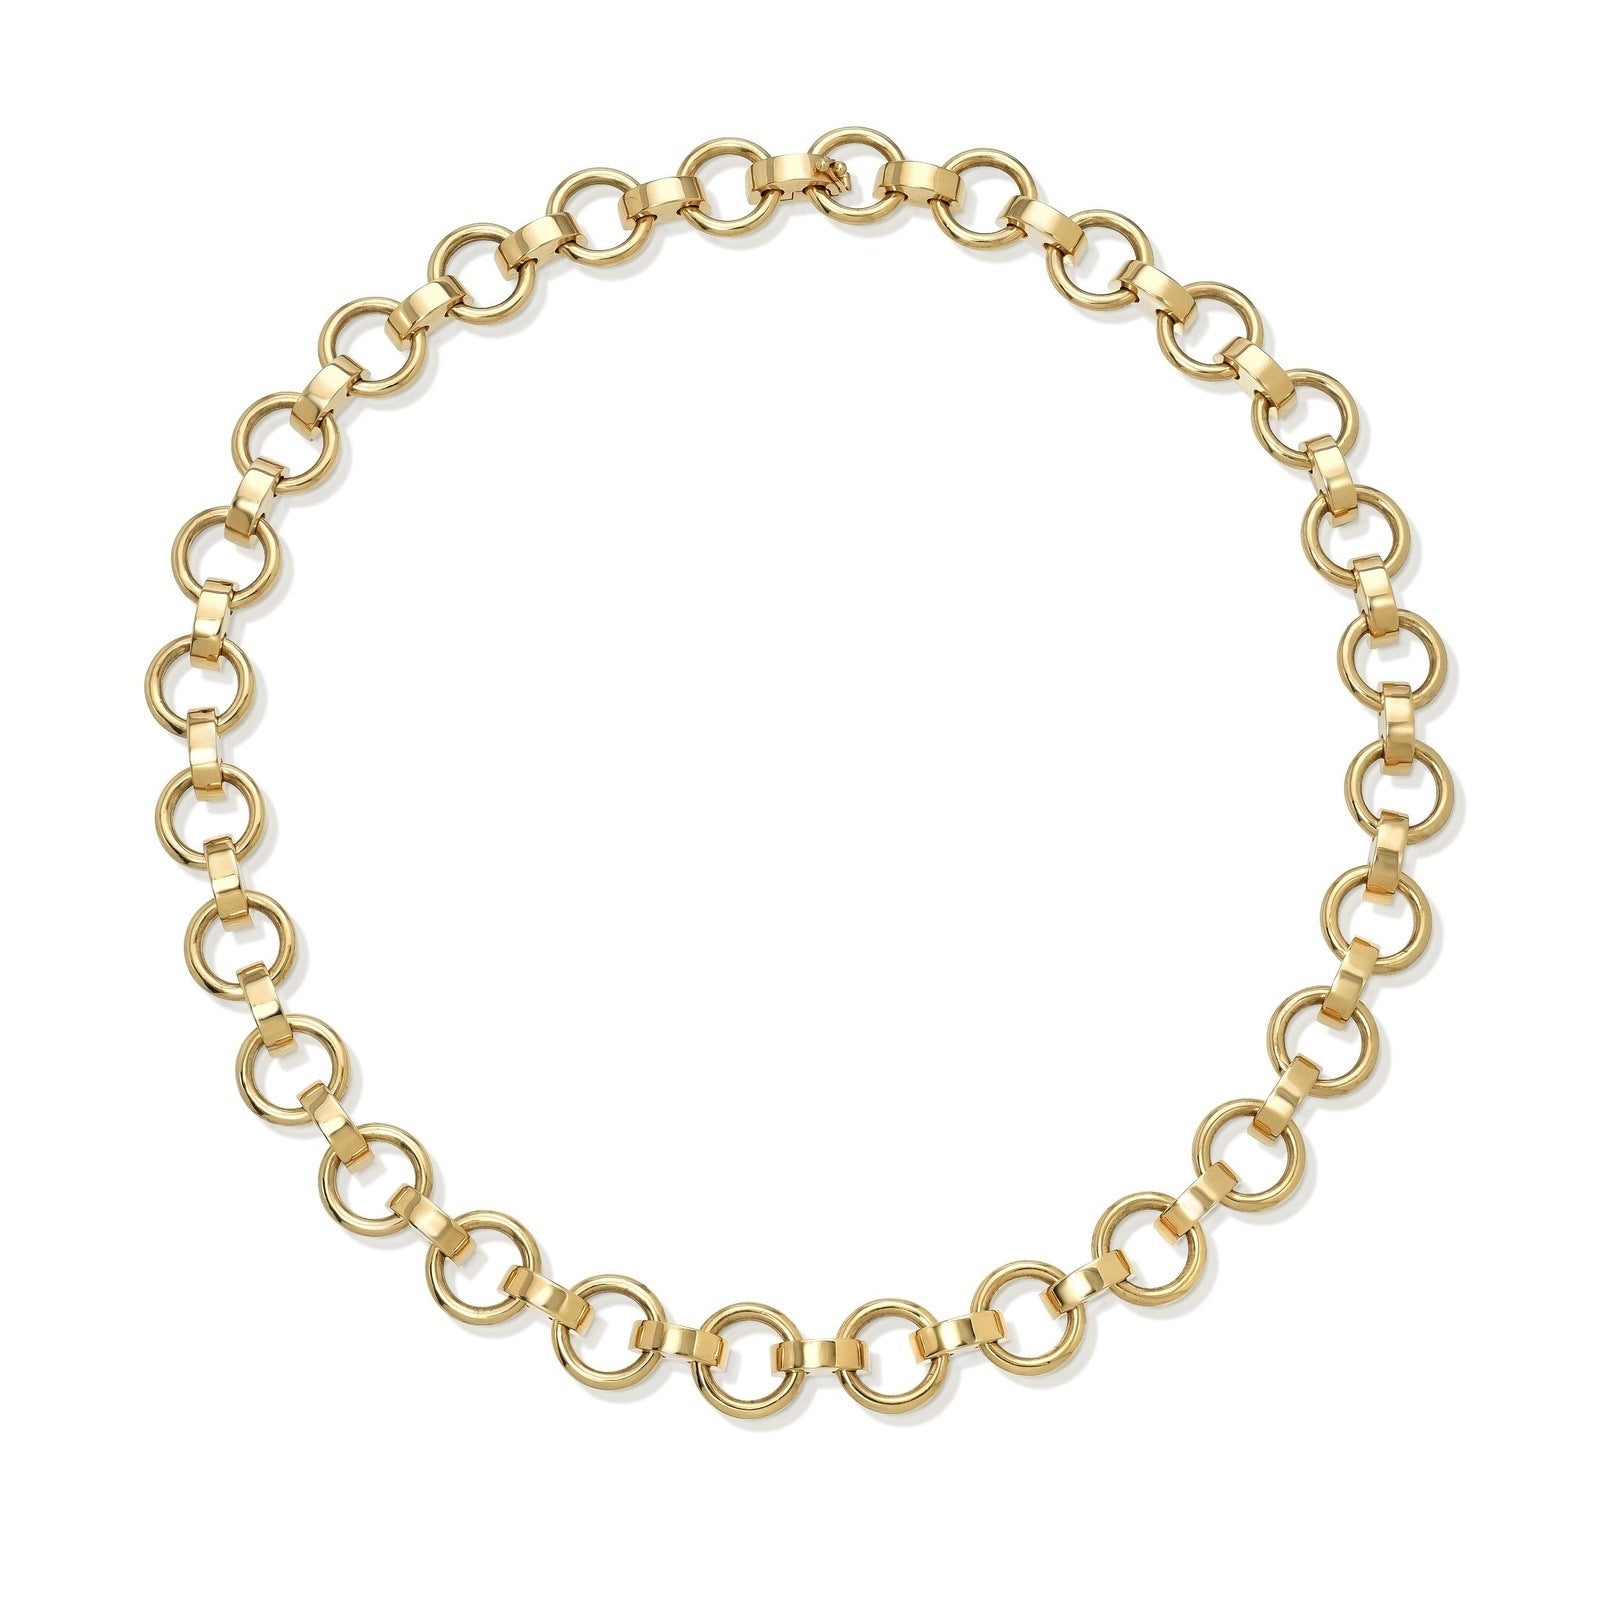 SINGLE STONE ASTRID NECKLACE featuring Handcrafted 18K gold round and saddle-shaped link necklace with hidden closure. Necklace measures 17". Please inquire for additional customization.